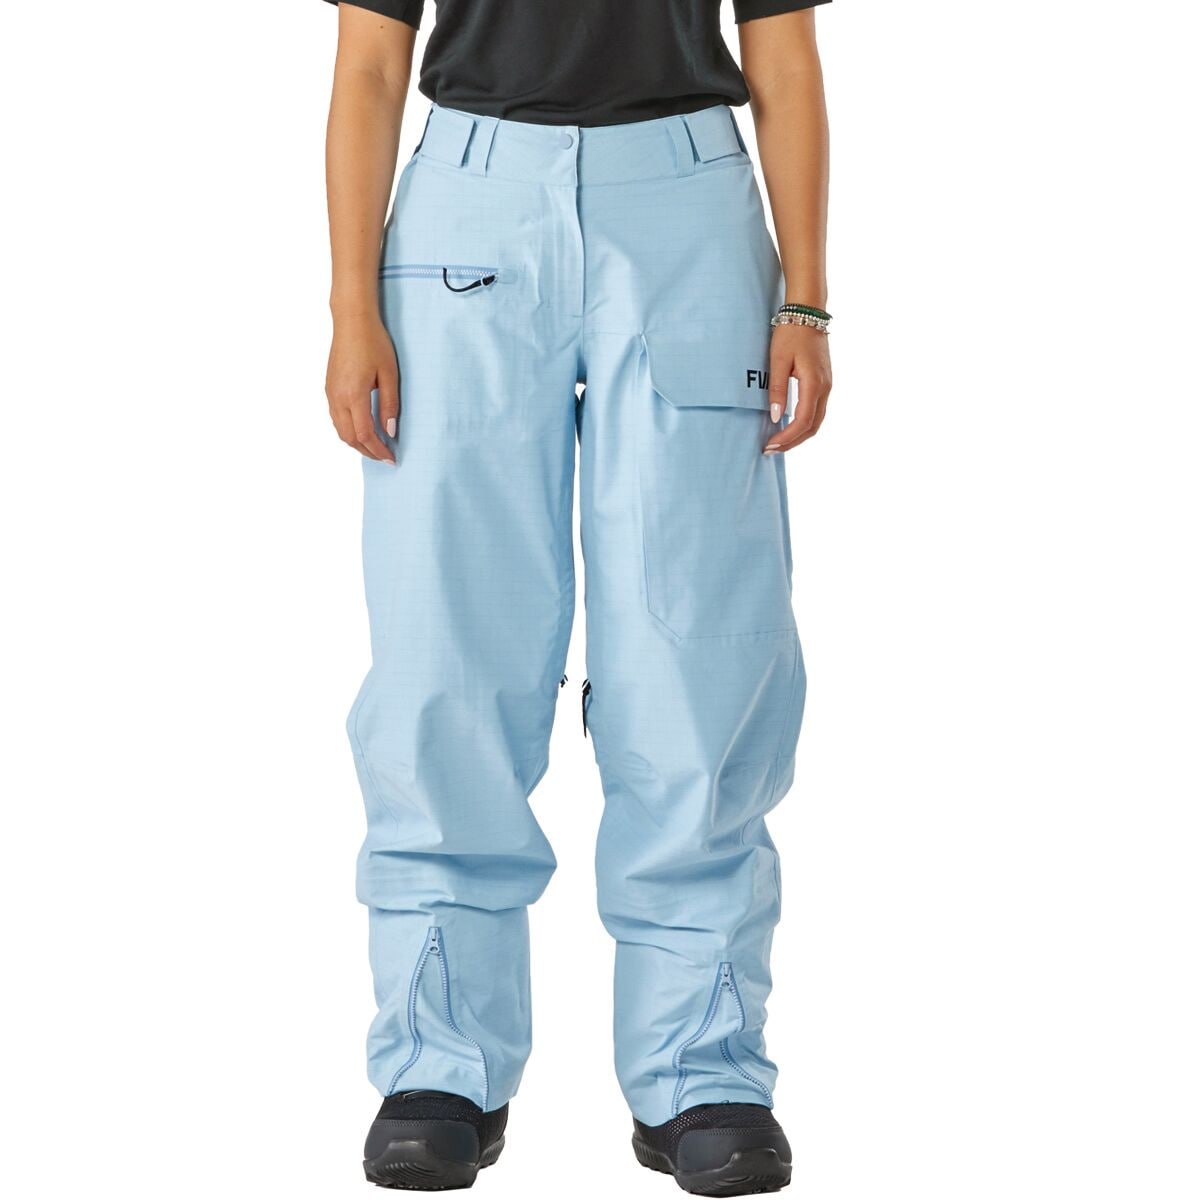 FW Apparel Catalyst Fusion Shell Pant - Women's